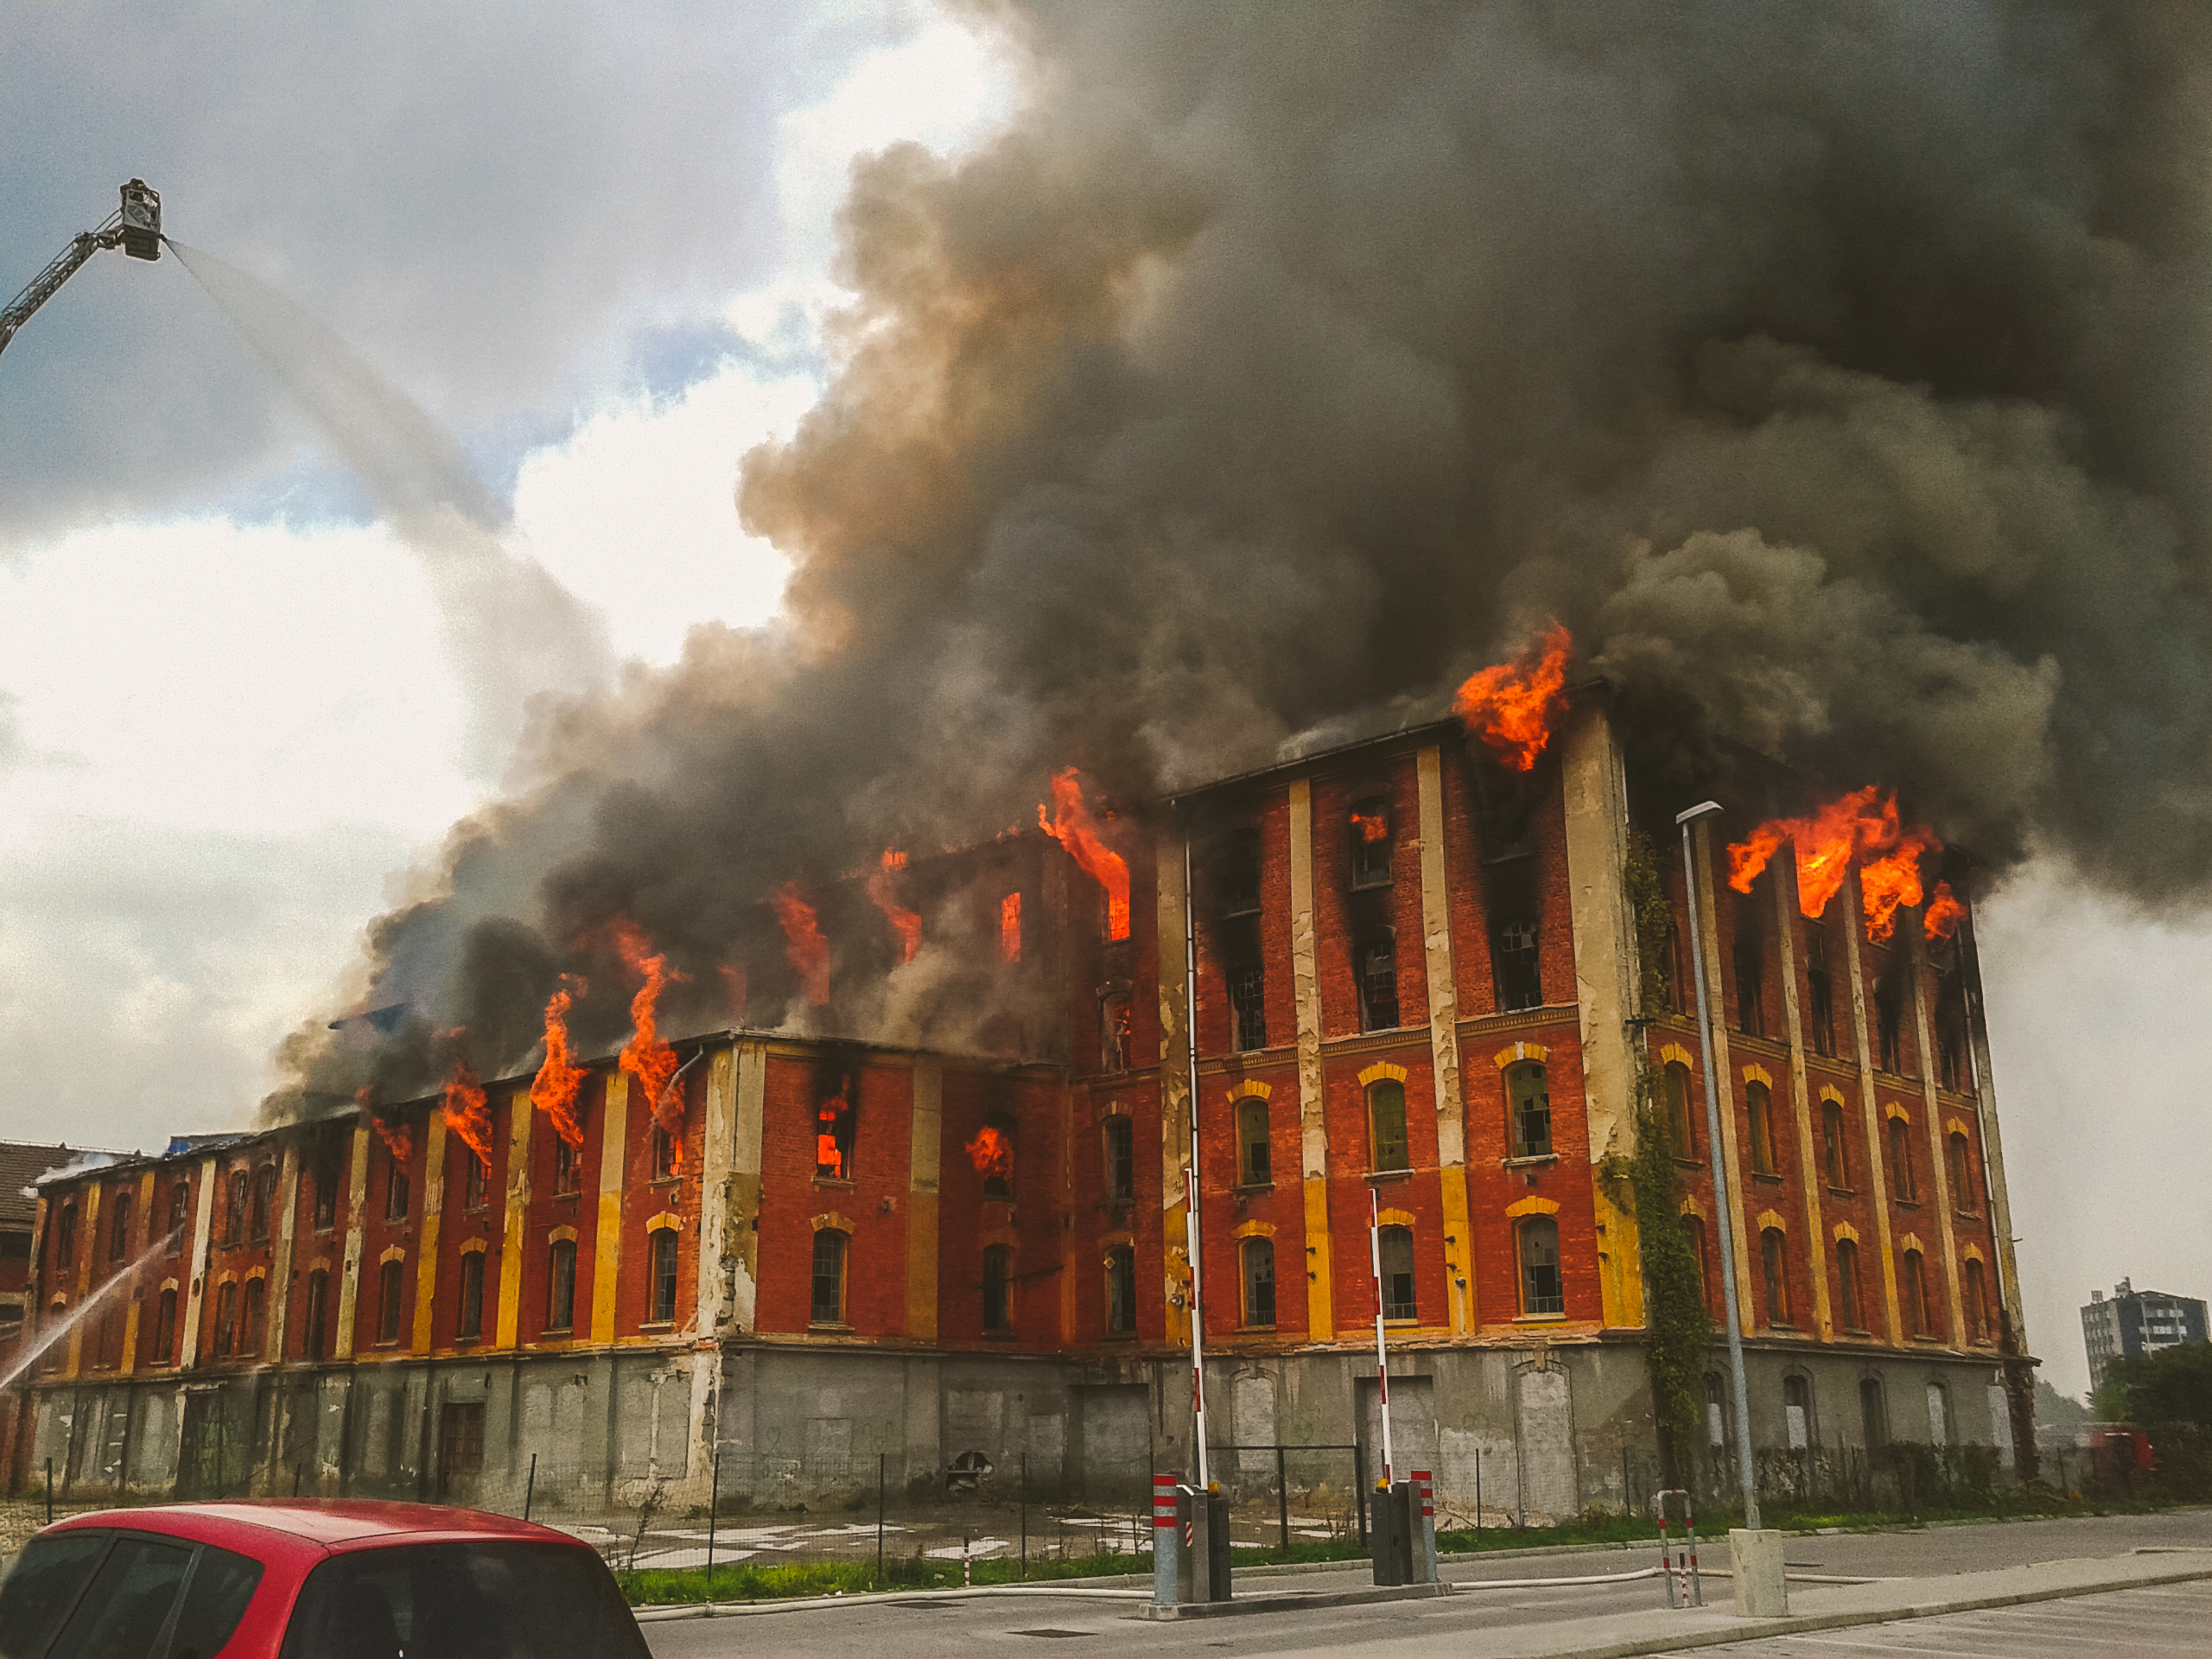 Fire In An Old Building